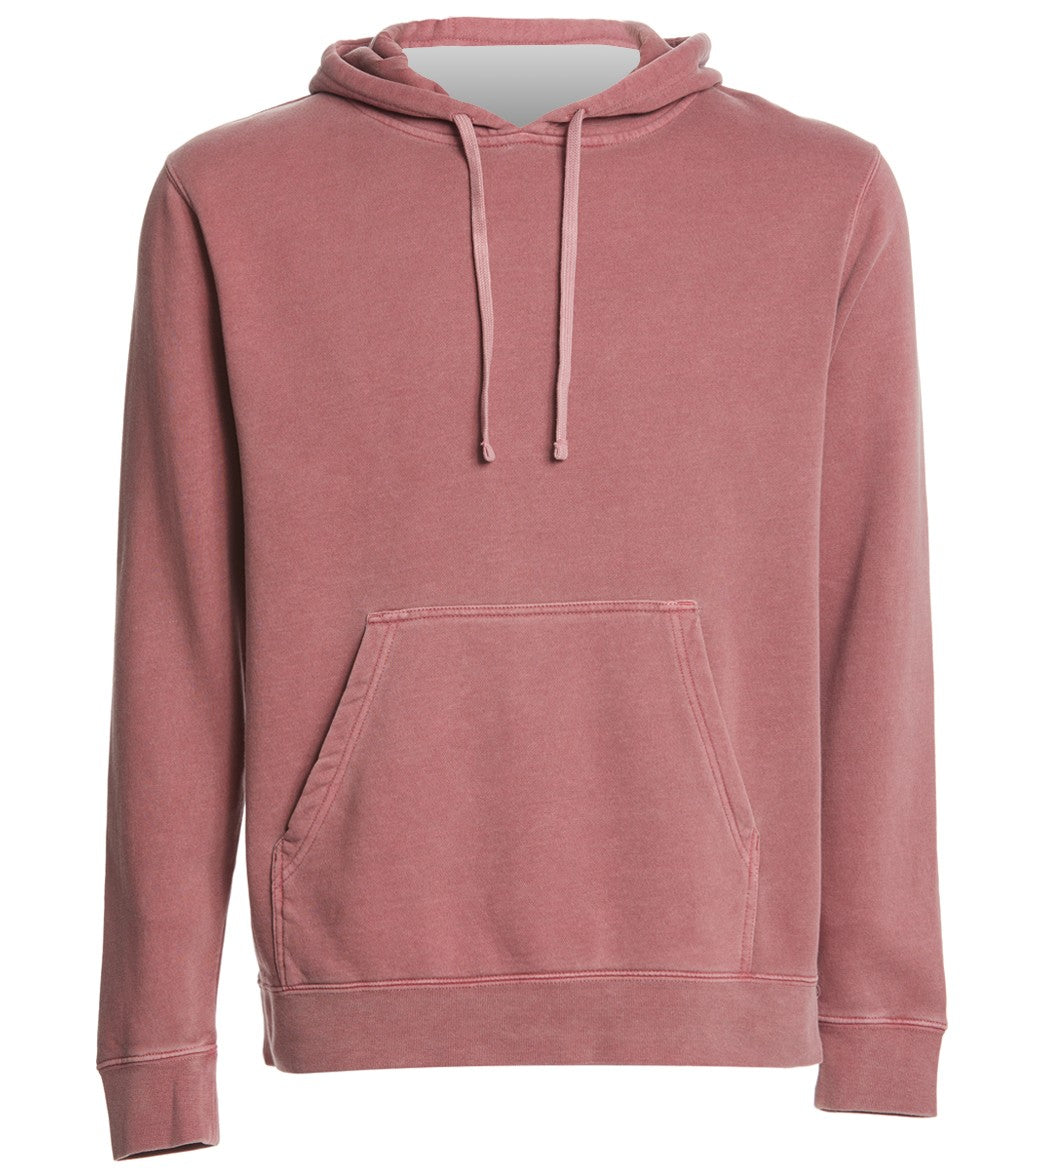 Men's Midweight Pigment Dyed Hooded Sweatshirt - Maroon Large Cotton/Polyester - Swimoutlet.com